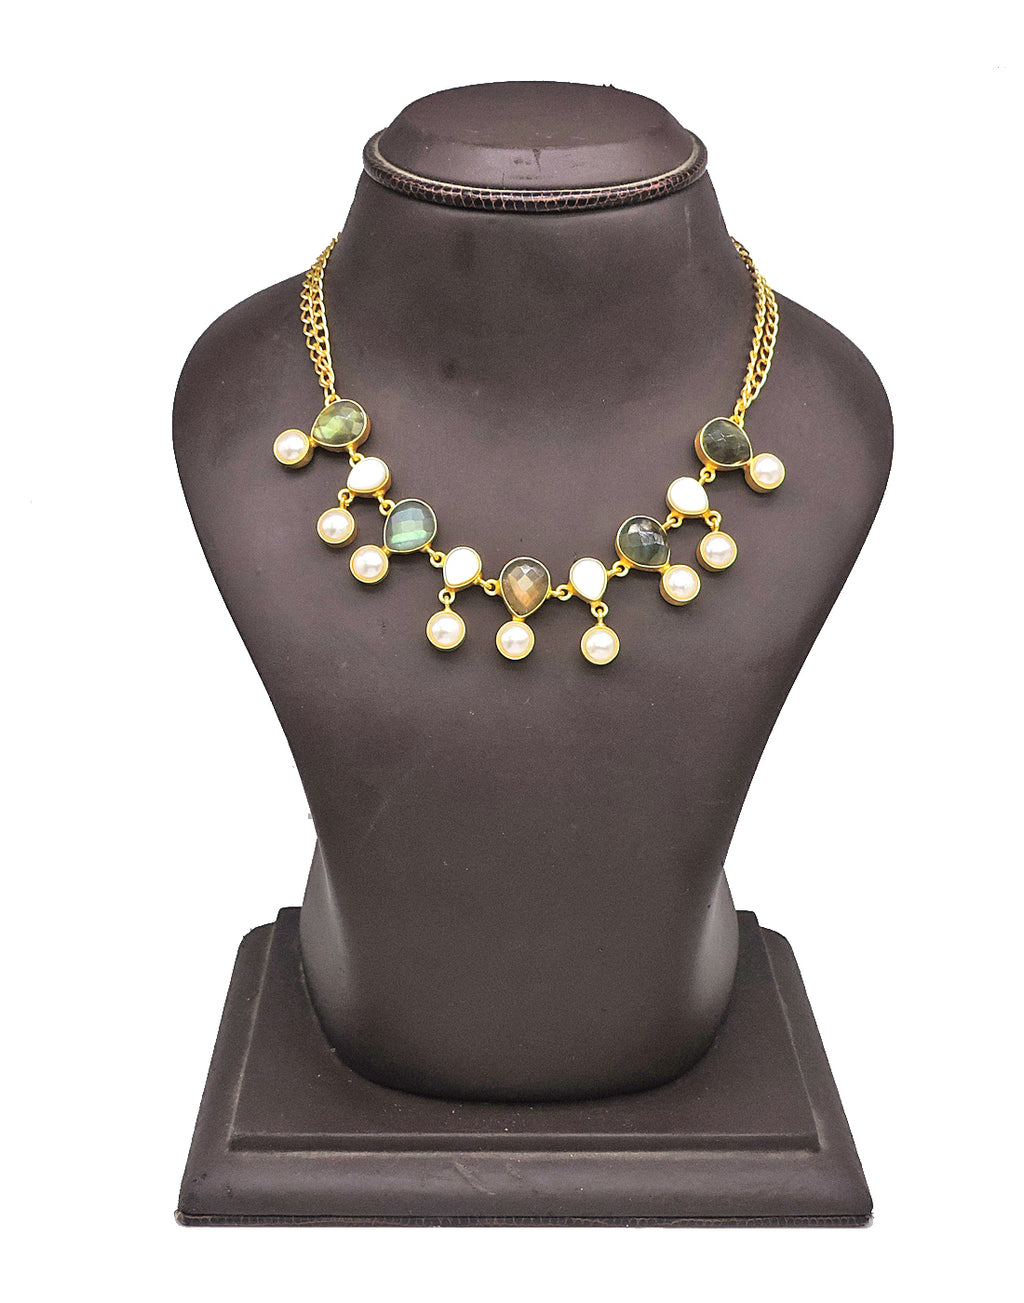 Labradorite & Pearl Necklace - Statement Necklaces - Gold-Plated & Hypoallergenic Jewellery - Made in India - Dubai Jewellery - Dori